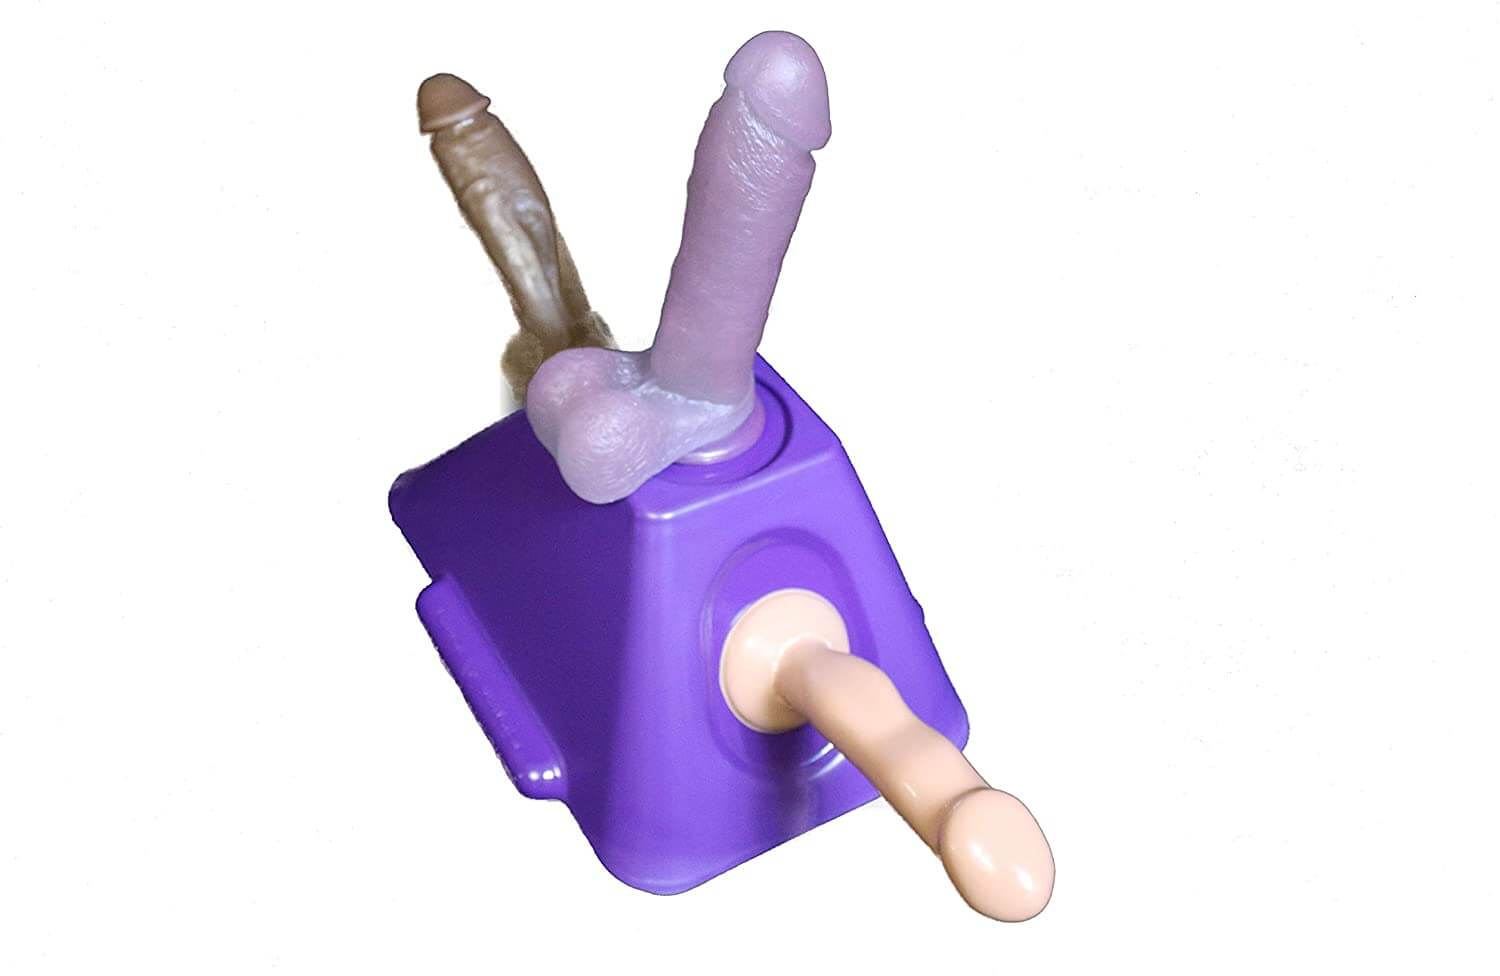 Tom The Other Man Suction Cup Dildo Mount